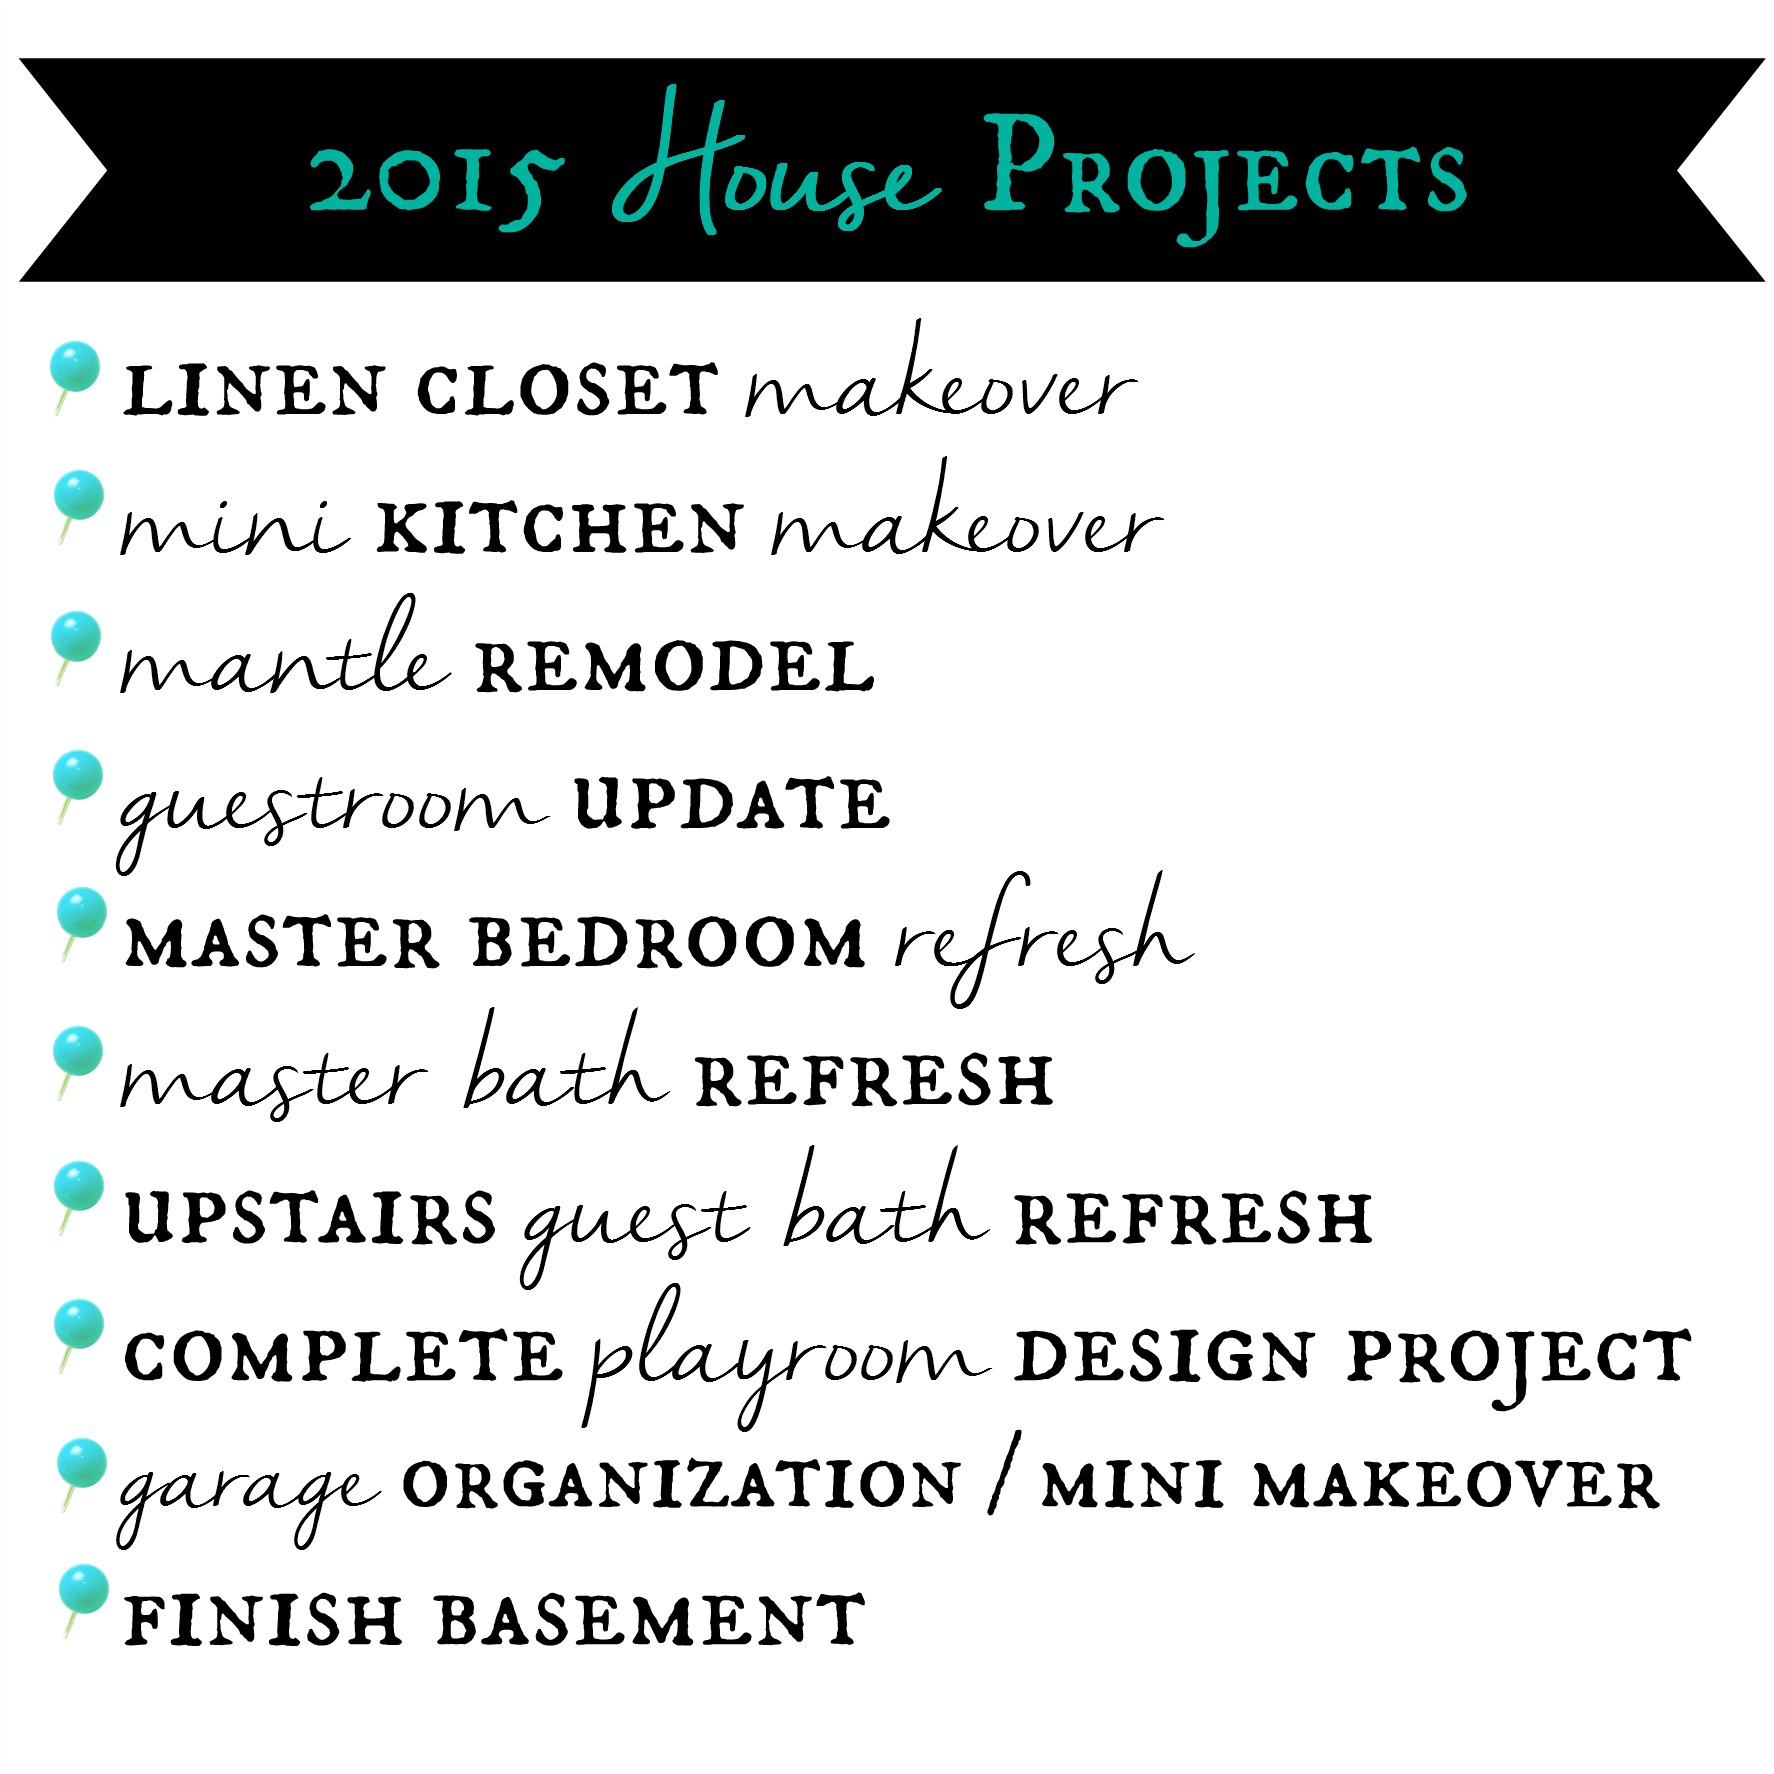 2015 house projects - this is our bliss